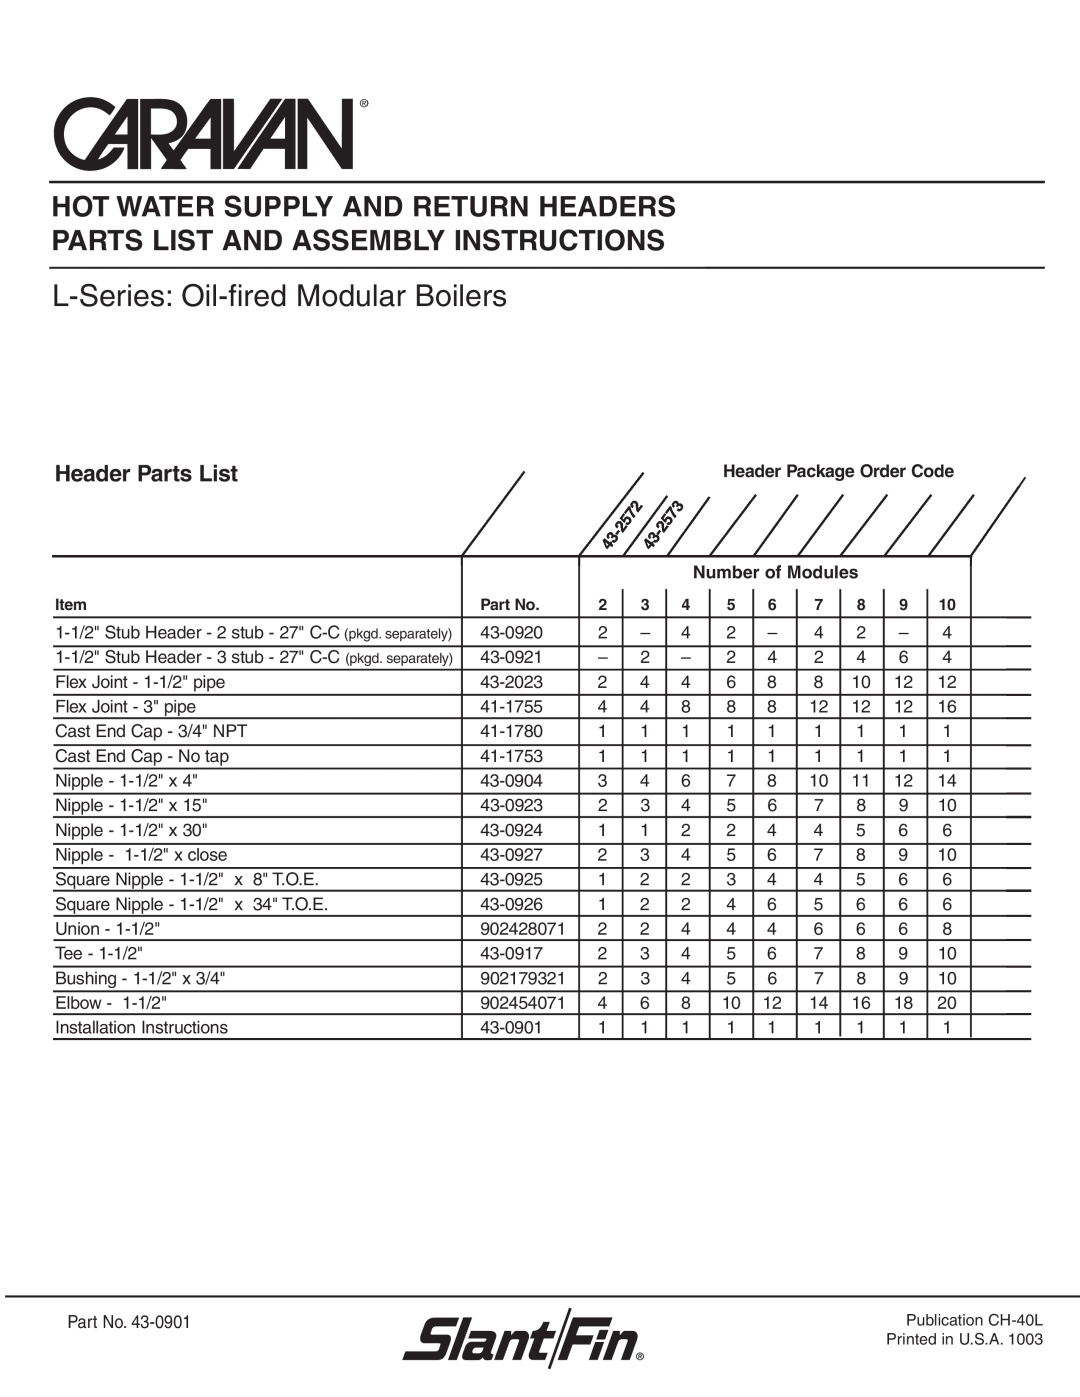 Slant/Fin L-Series installation instructions Header Package Order Code, Number of Modules, Header Parts List 